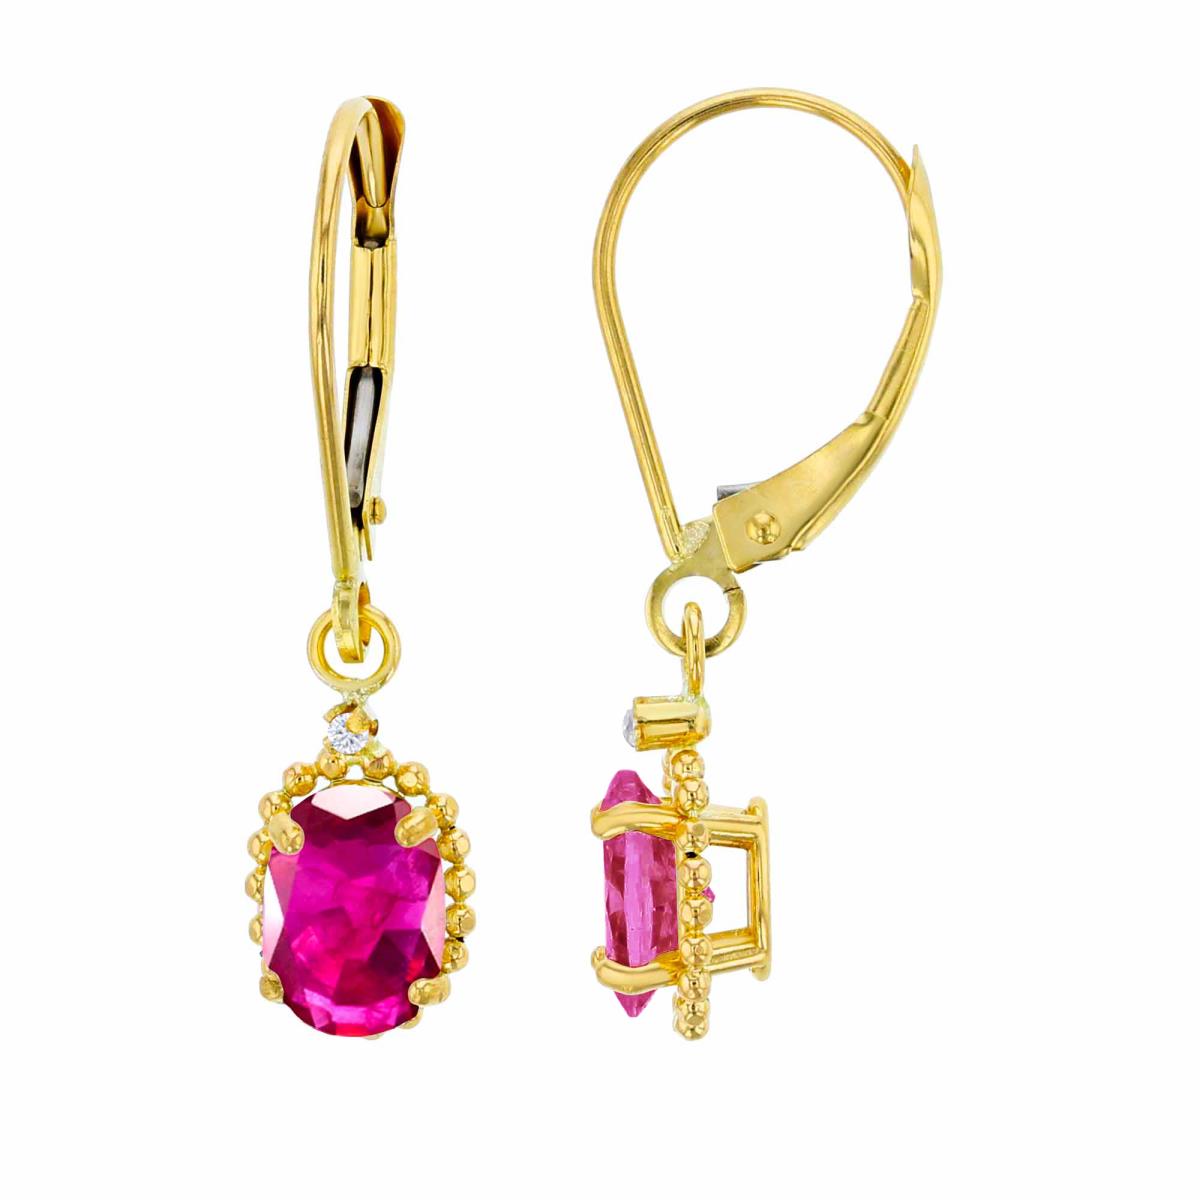 10K Yellow Gold 1.25mm Rd Created White Sapphire & 6x4mm Ov Glass Filled Ruby Bead Frame Drop Lever-Back Earring